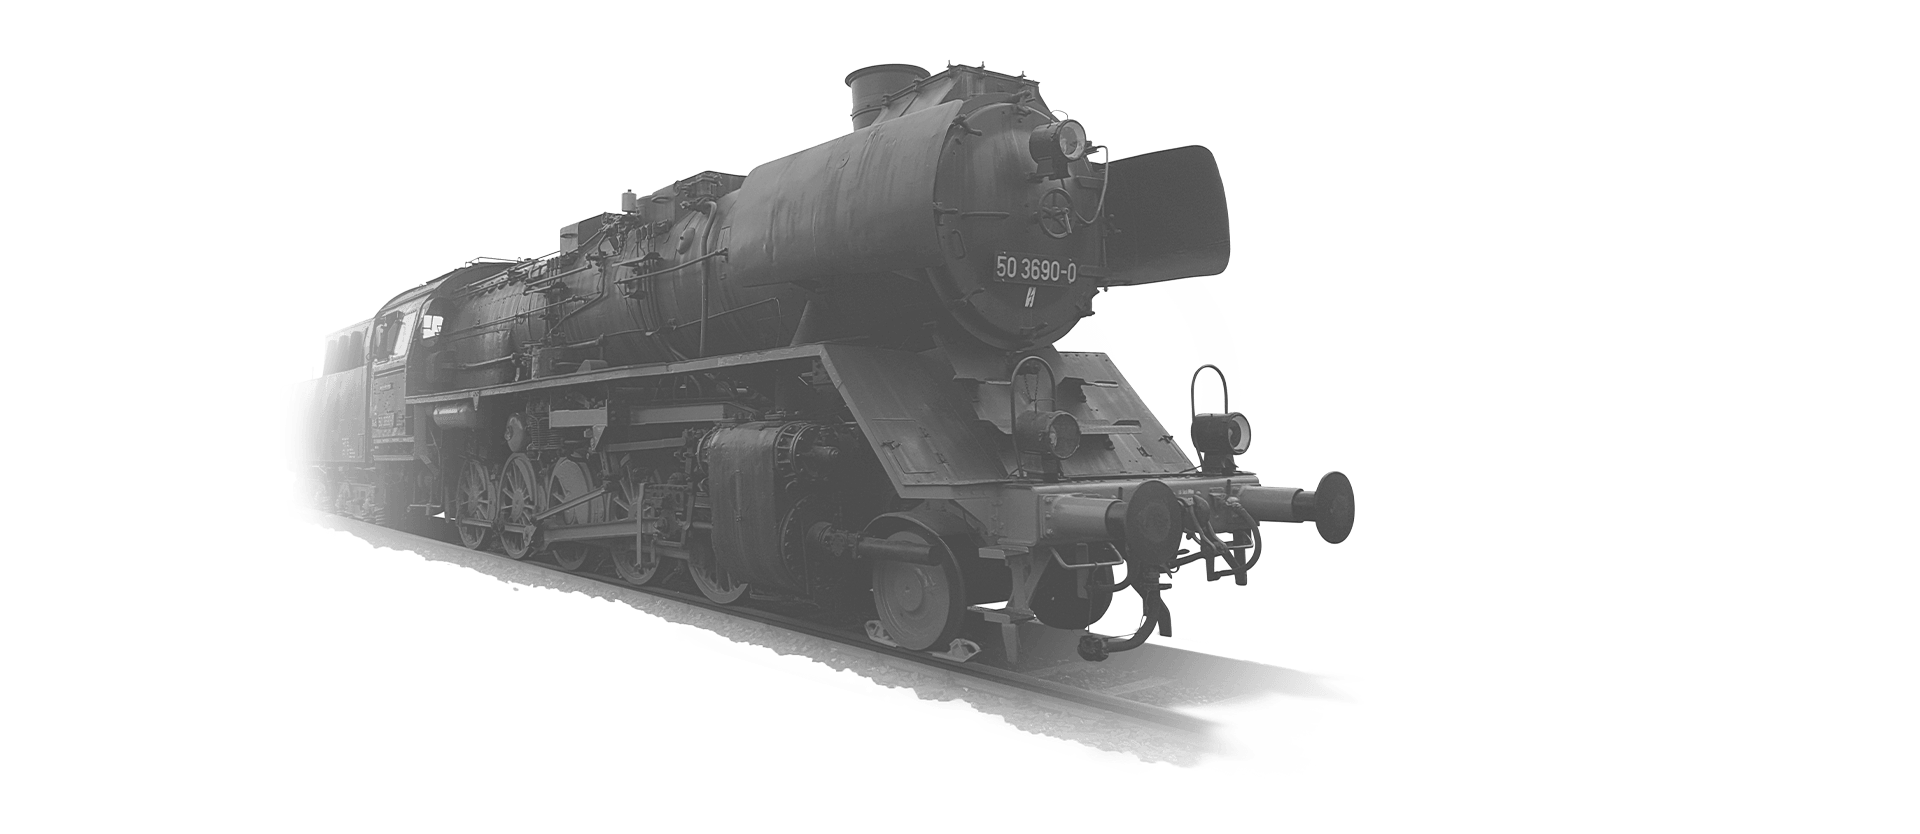 The locomotive 50-3690 is coming towards the camera in black and white